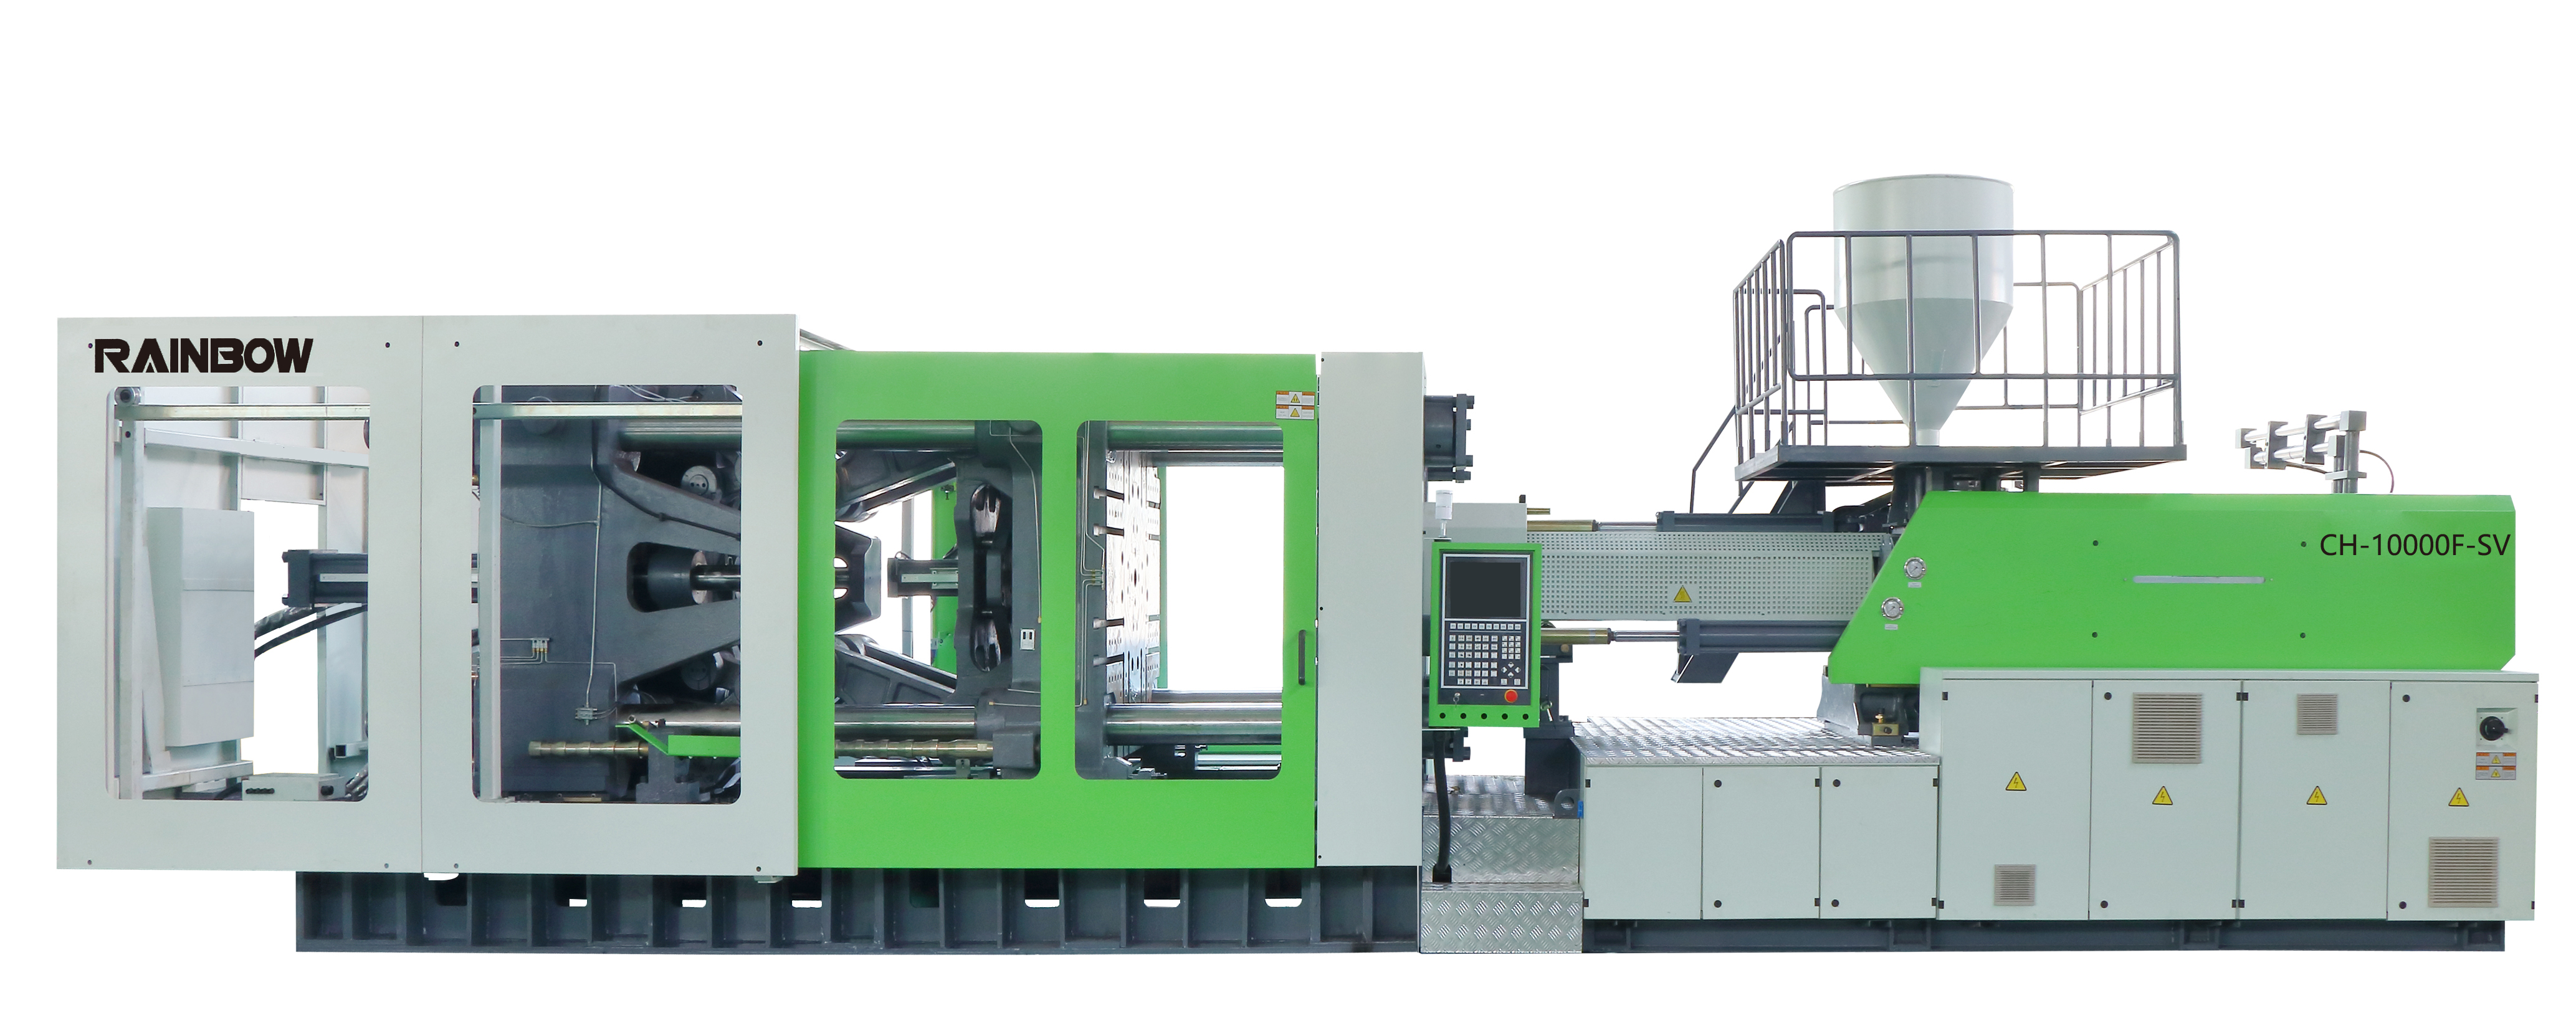 CH10000F injection molding machine